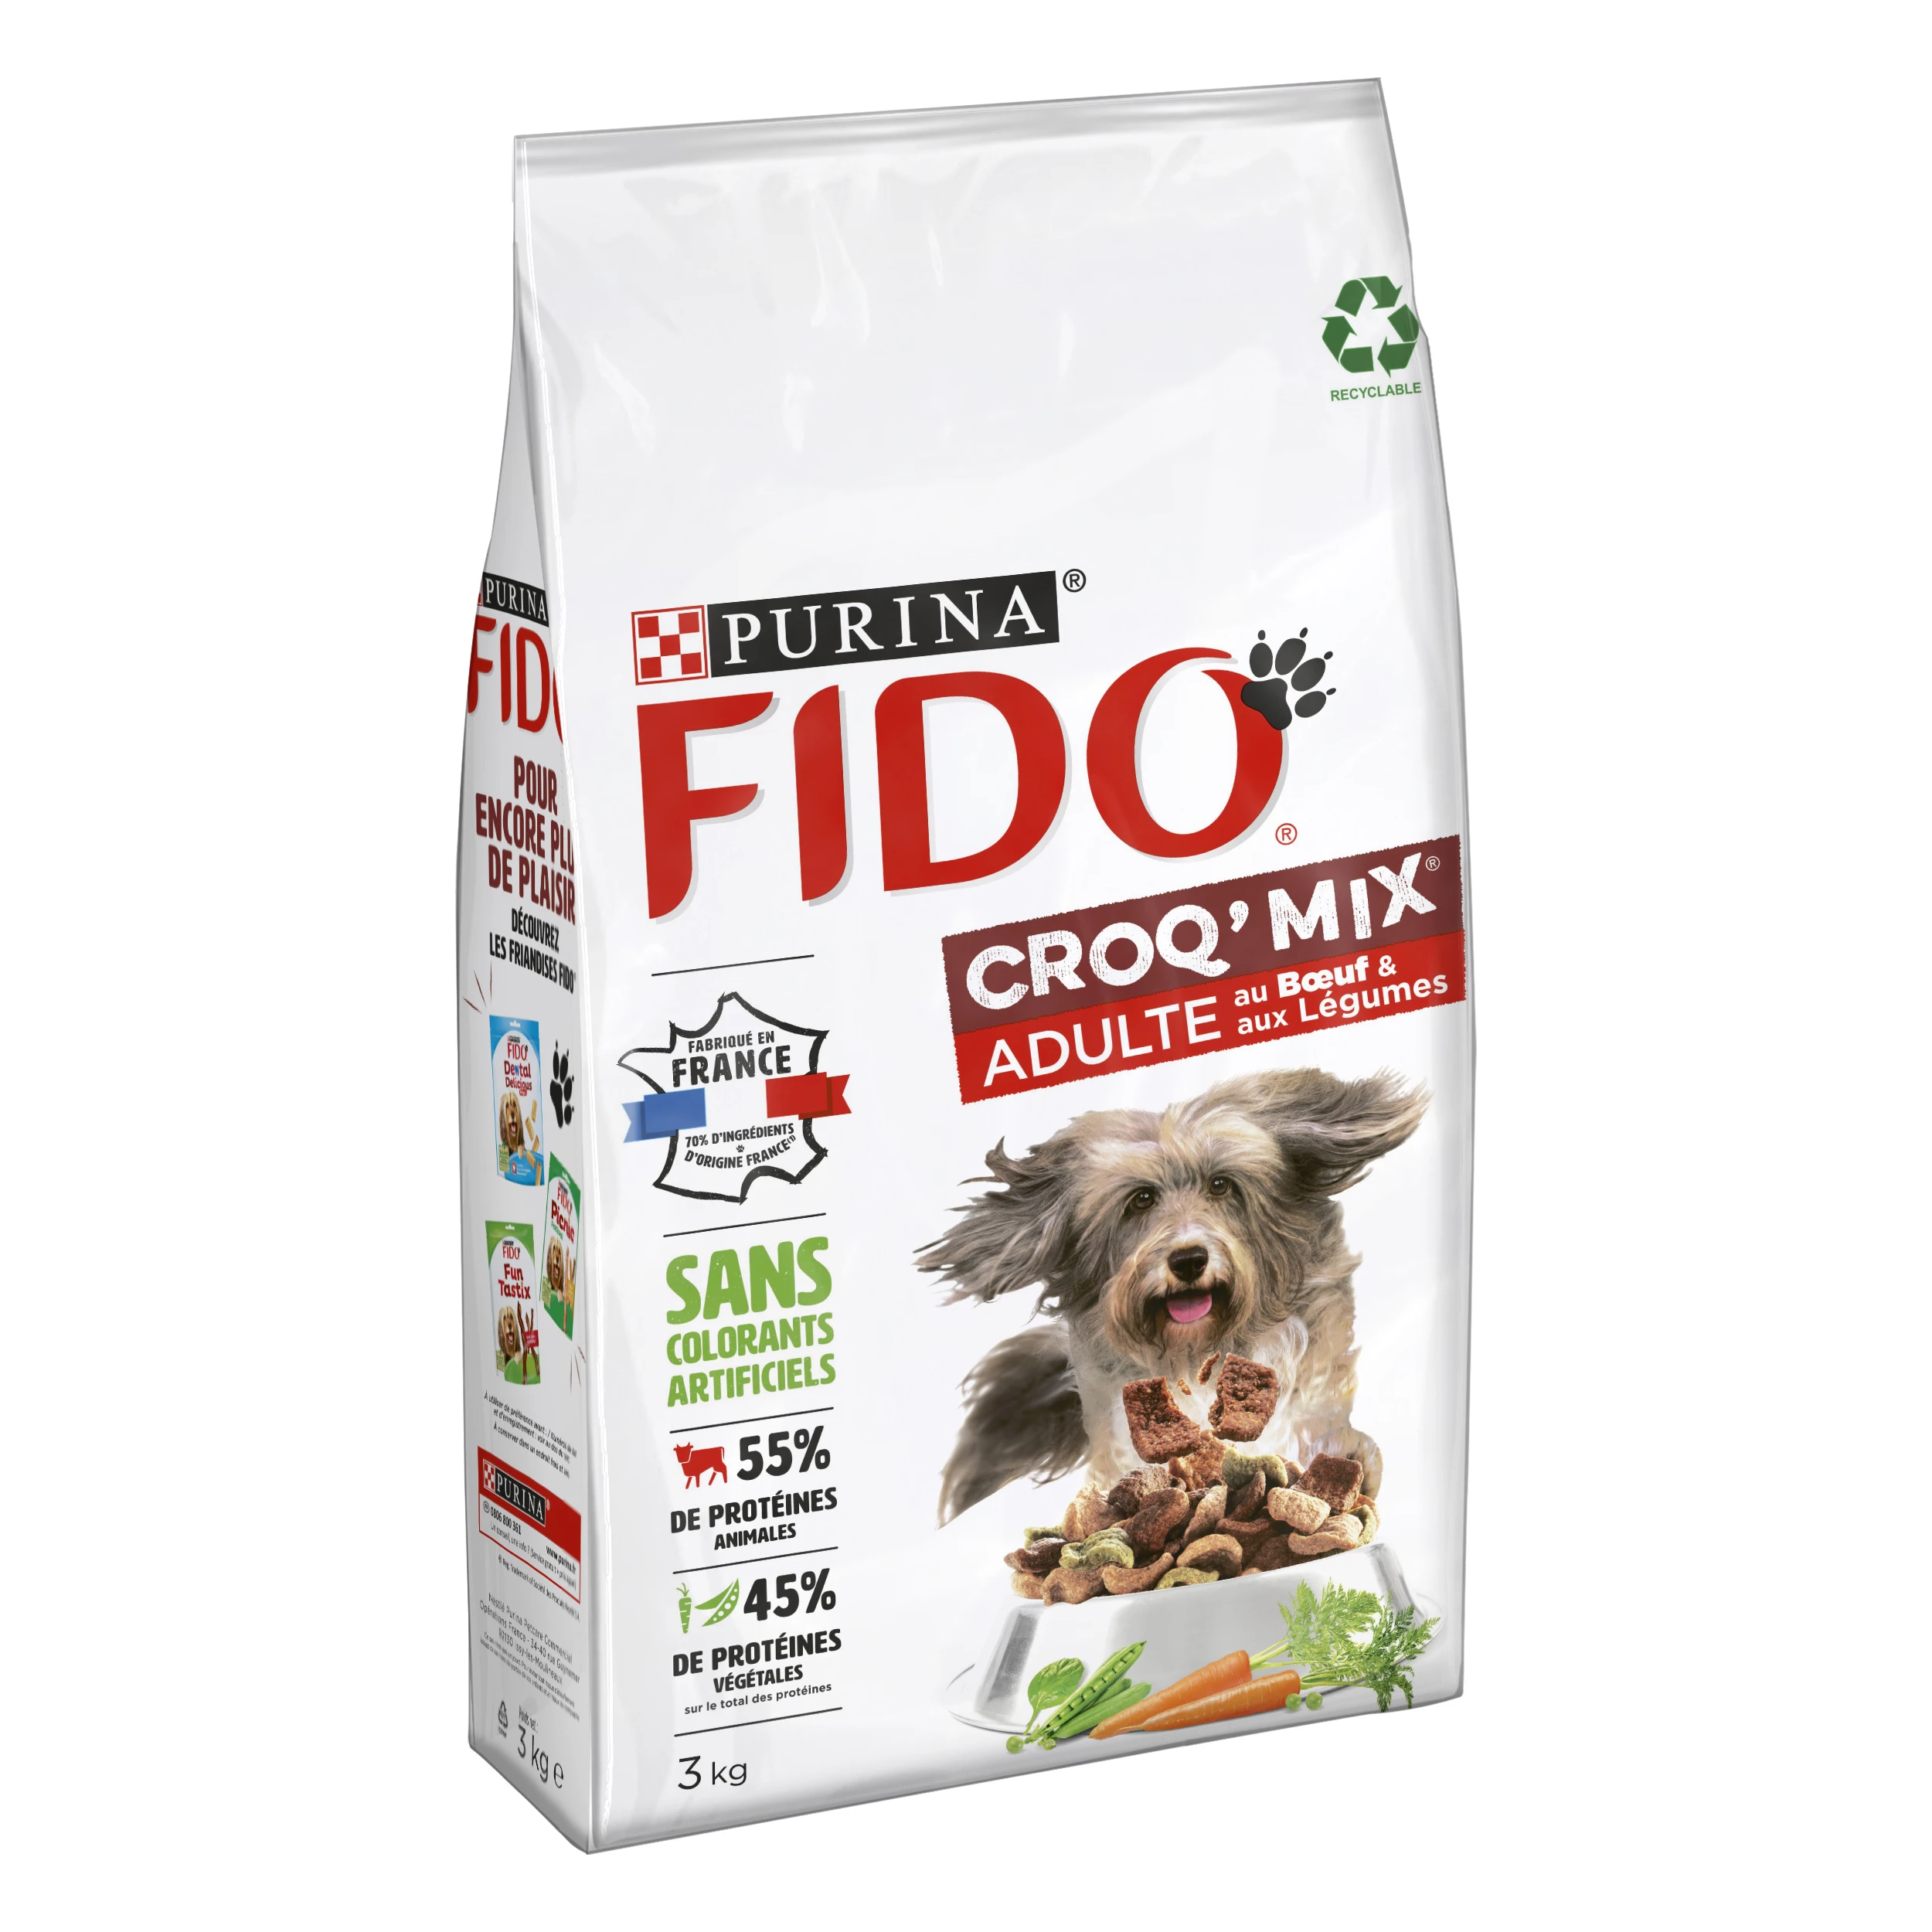 Croq' mix kibble for adult dogs with beef and vegetables 3kg - PURINA FIDO